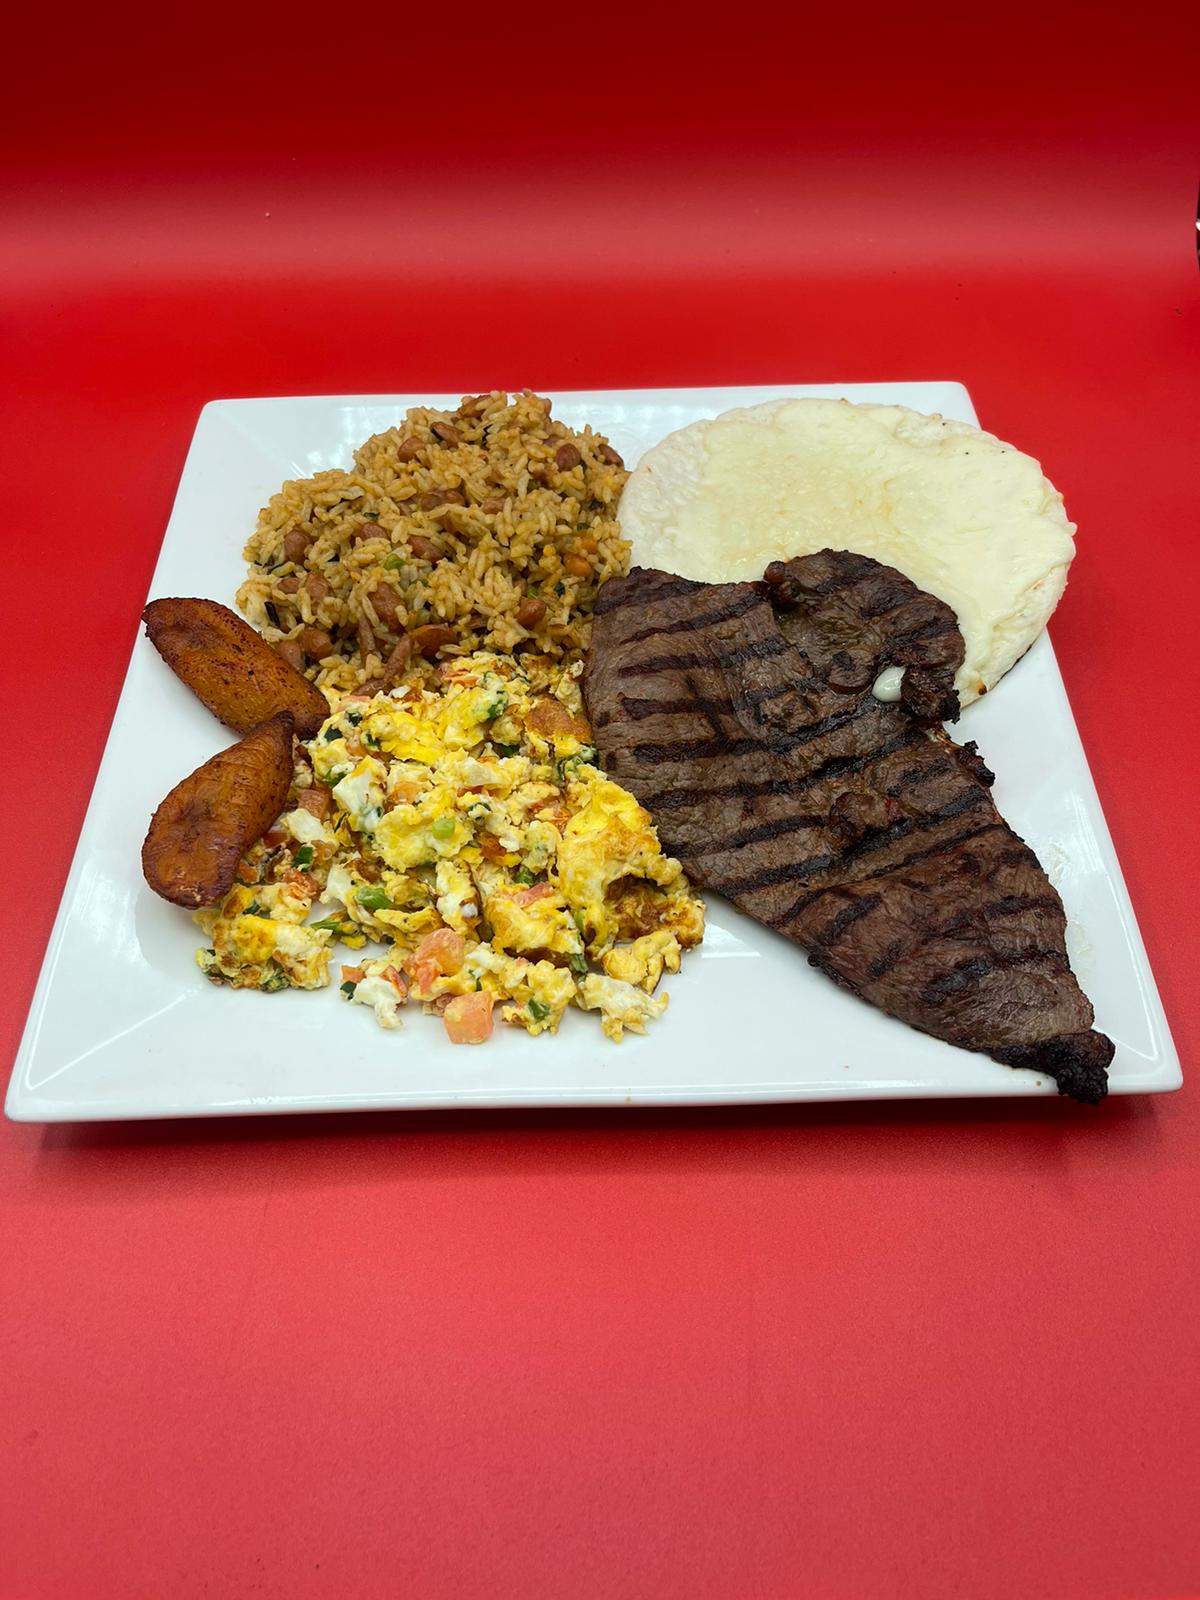 A plate with steak, rice and beans on it.